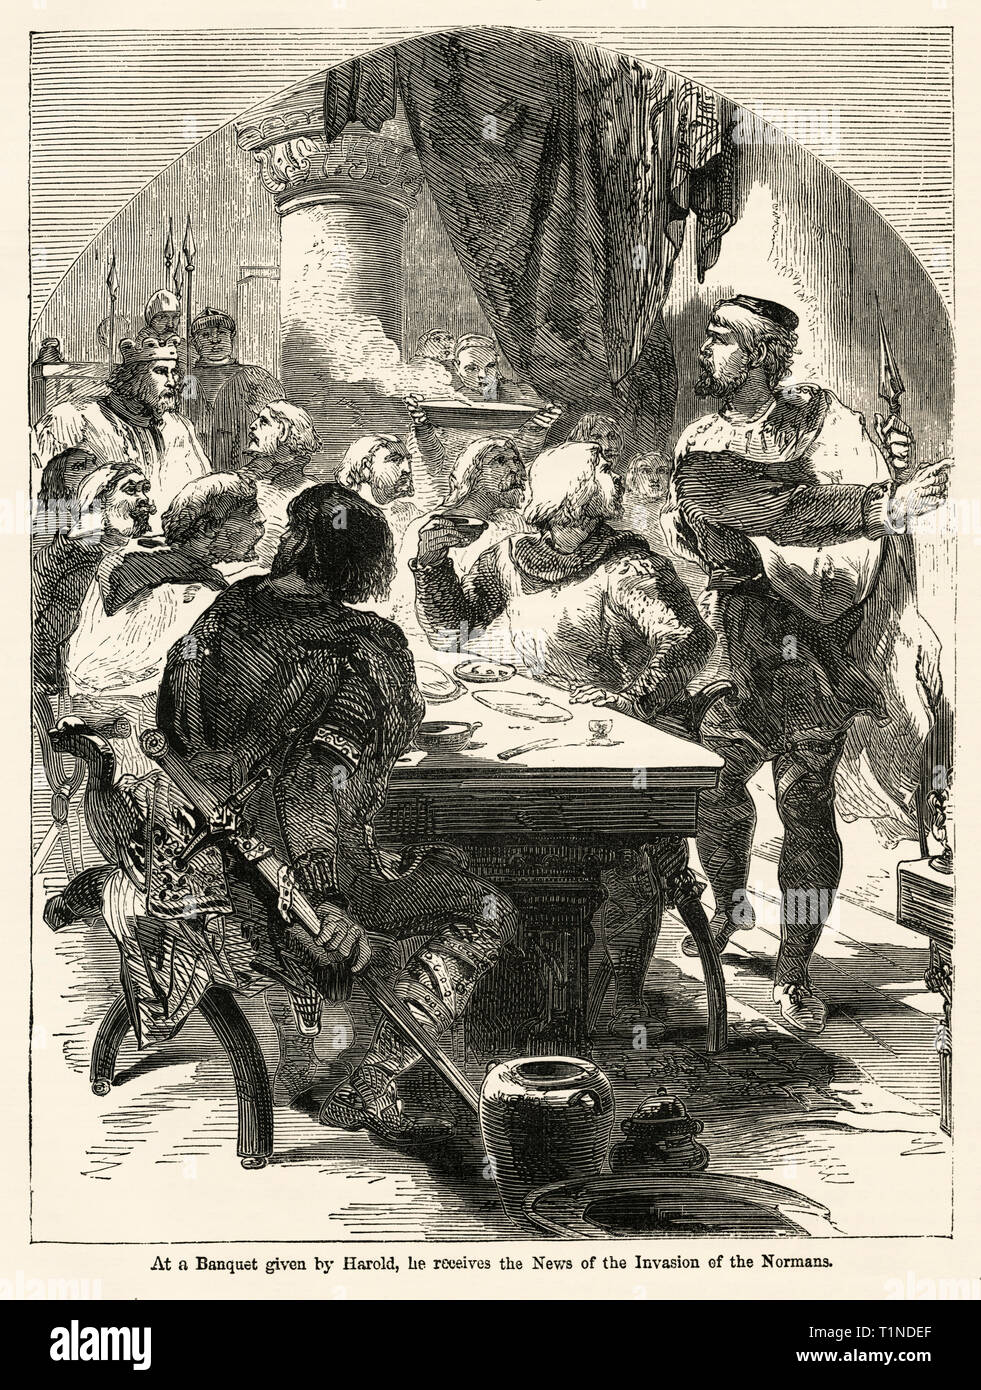 At a Banquet given by Harold, he receives the News of the Invasion of the Normans, Illustration from John Cassell's Illustrated History of England, Vol. I from the earliest period to the reign of Edward the Fourth, Cassell, Petter and Galpin, 1857 Stock Photo